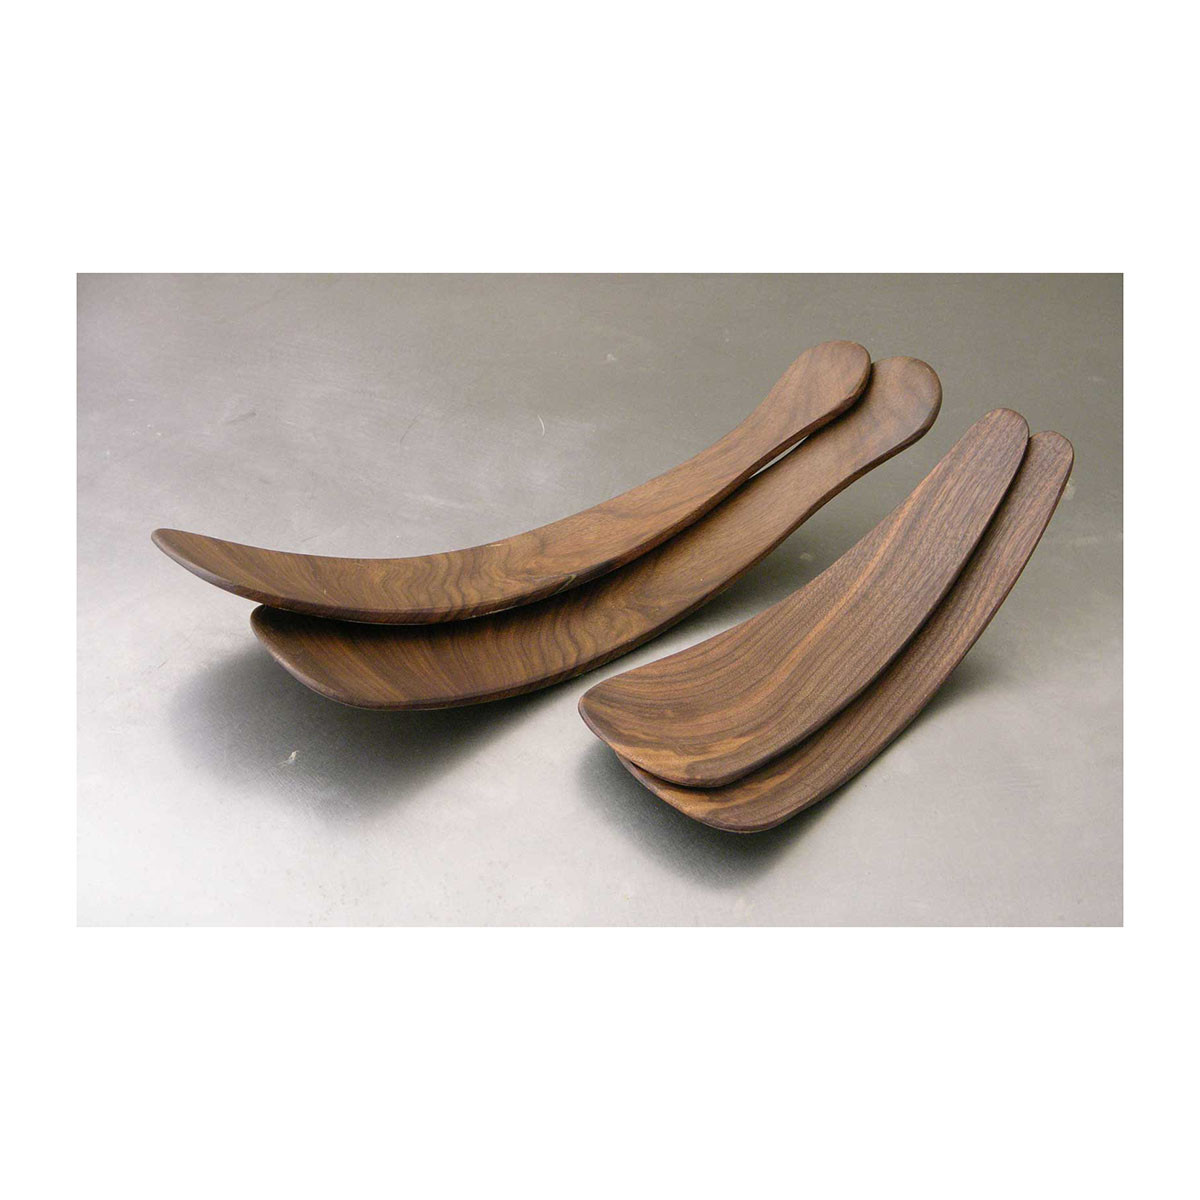 petermans boards and bowls Rustic Salad Tossers- Black Walnut